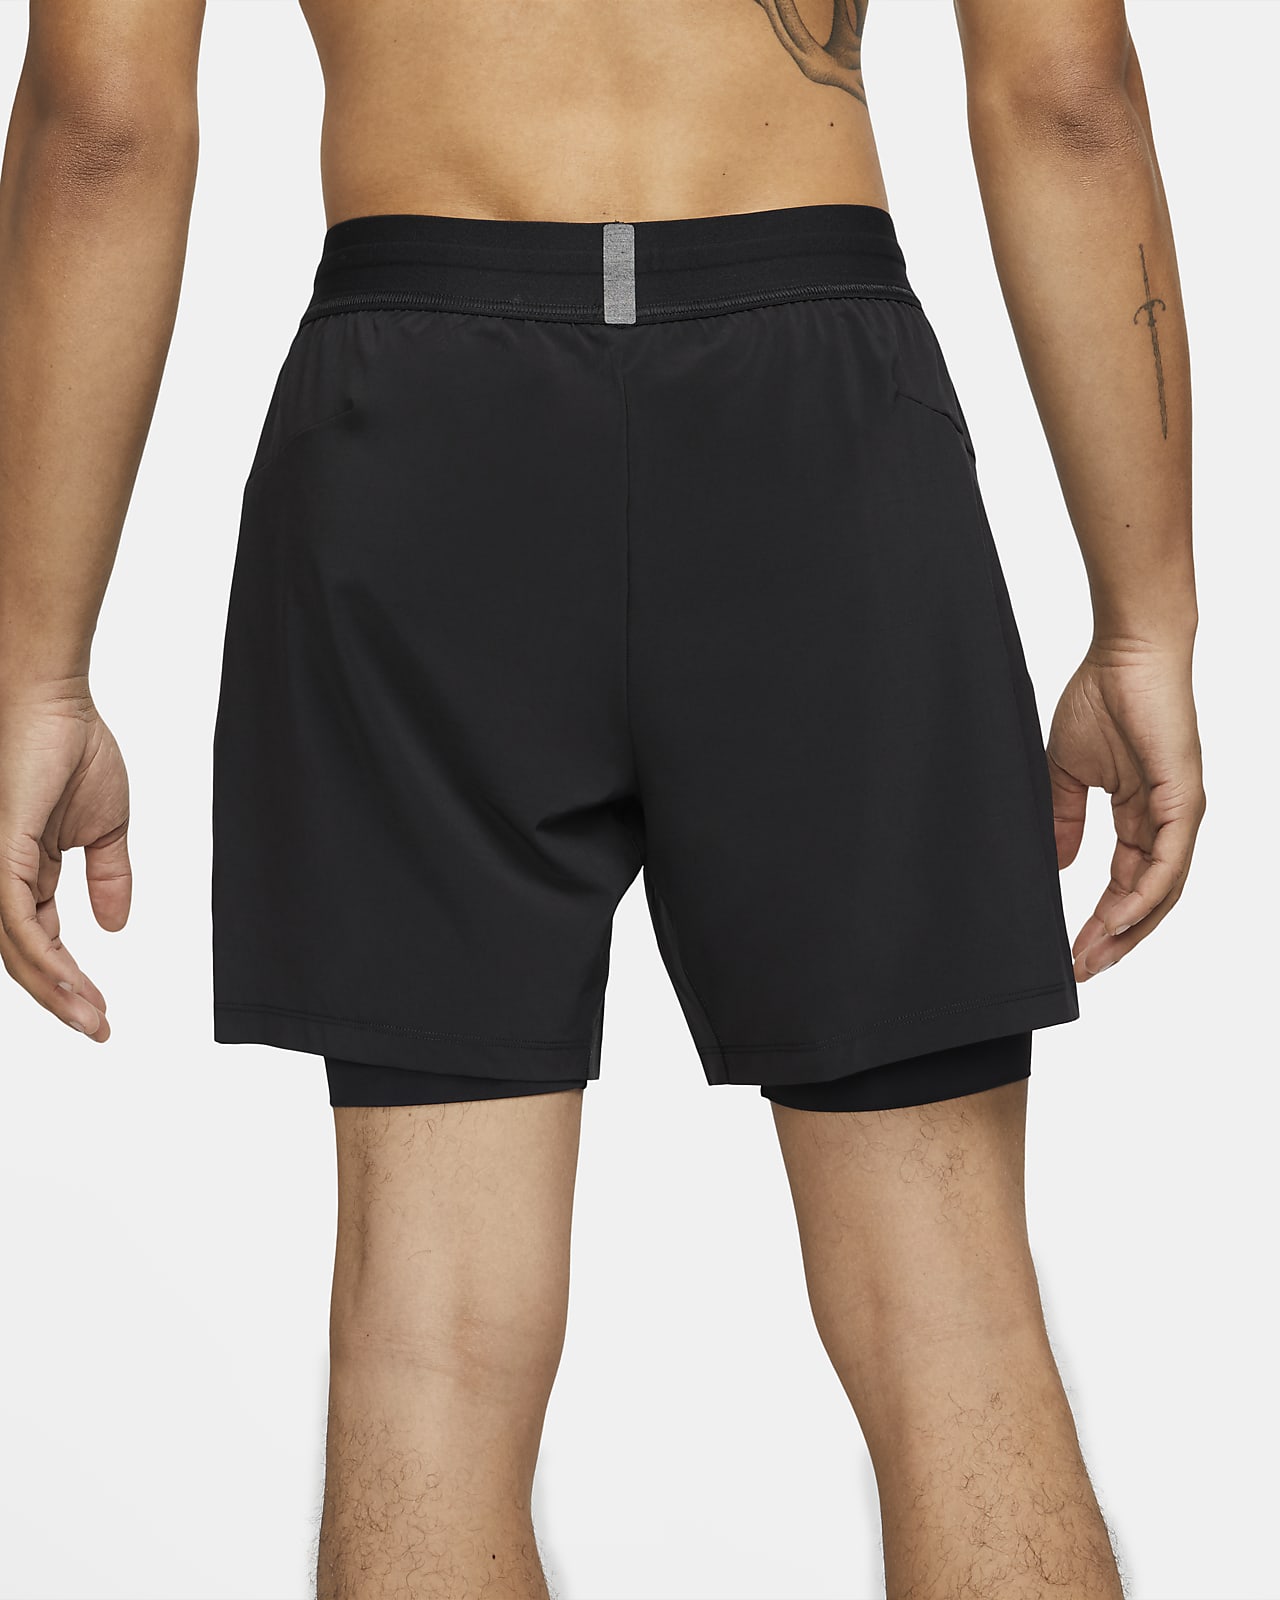 Men's Sportswear Double Layer Running Shorts 2 in 1 Fitness Pants